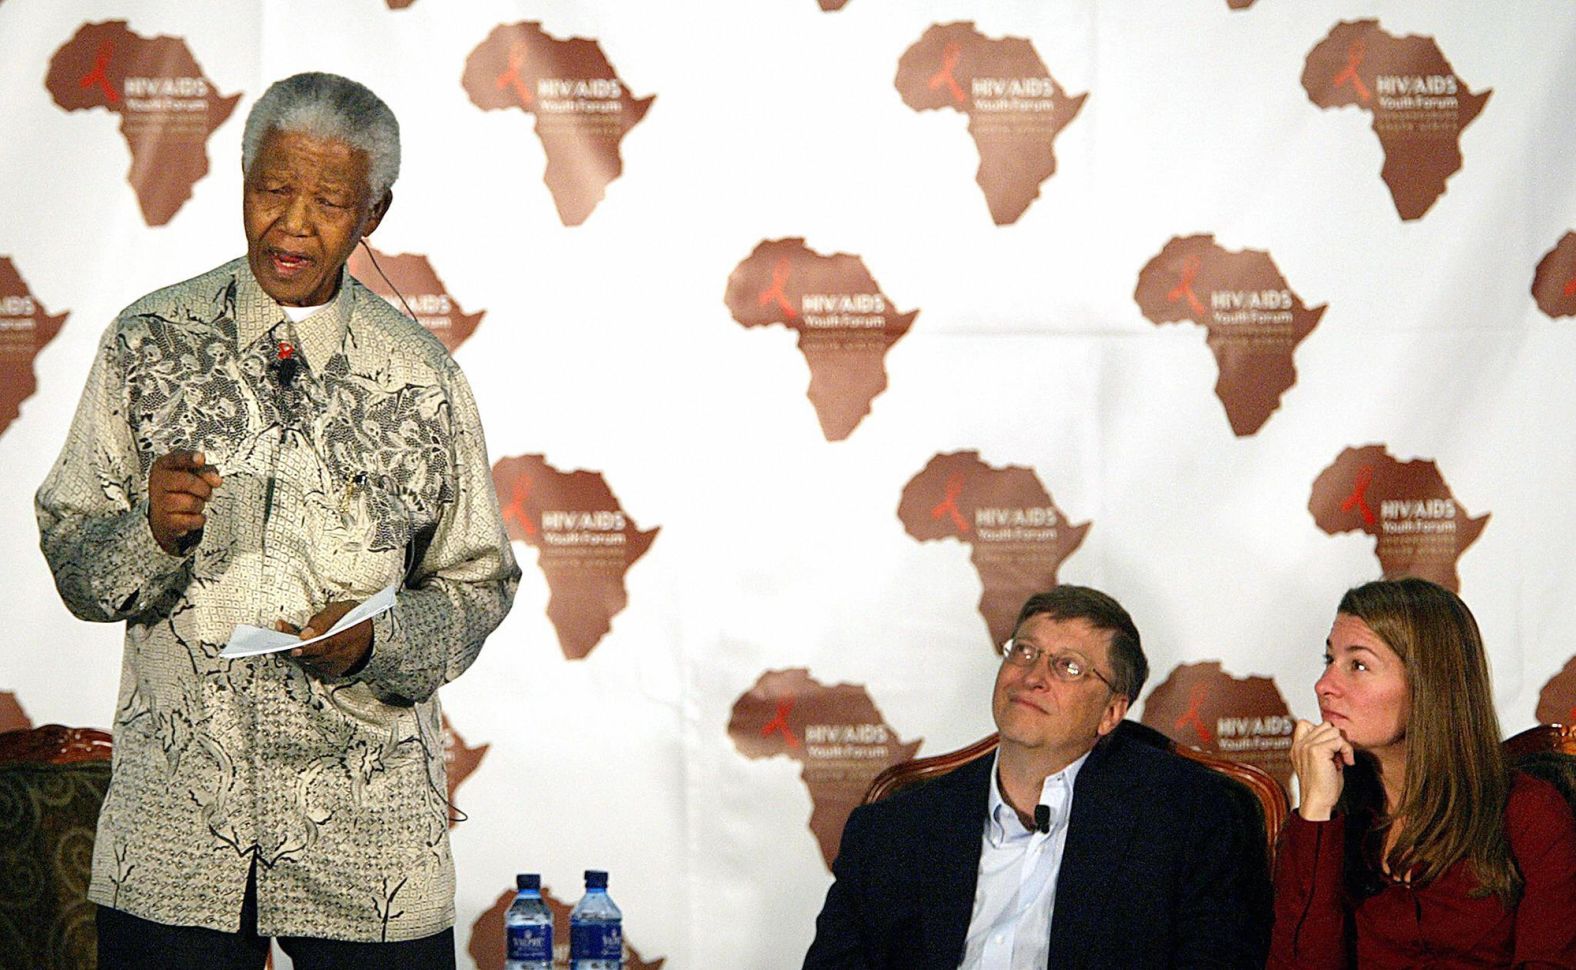 The Gateses listen to former South African President Nelson Mandela in Johannesburg as he addresses a youth forum on HIV/AIDS in 2003.